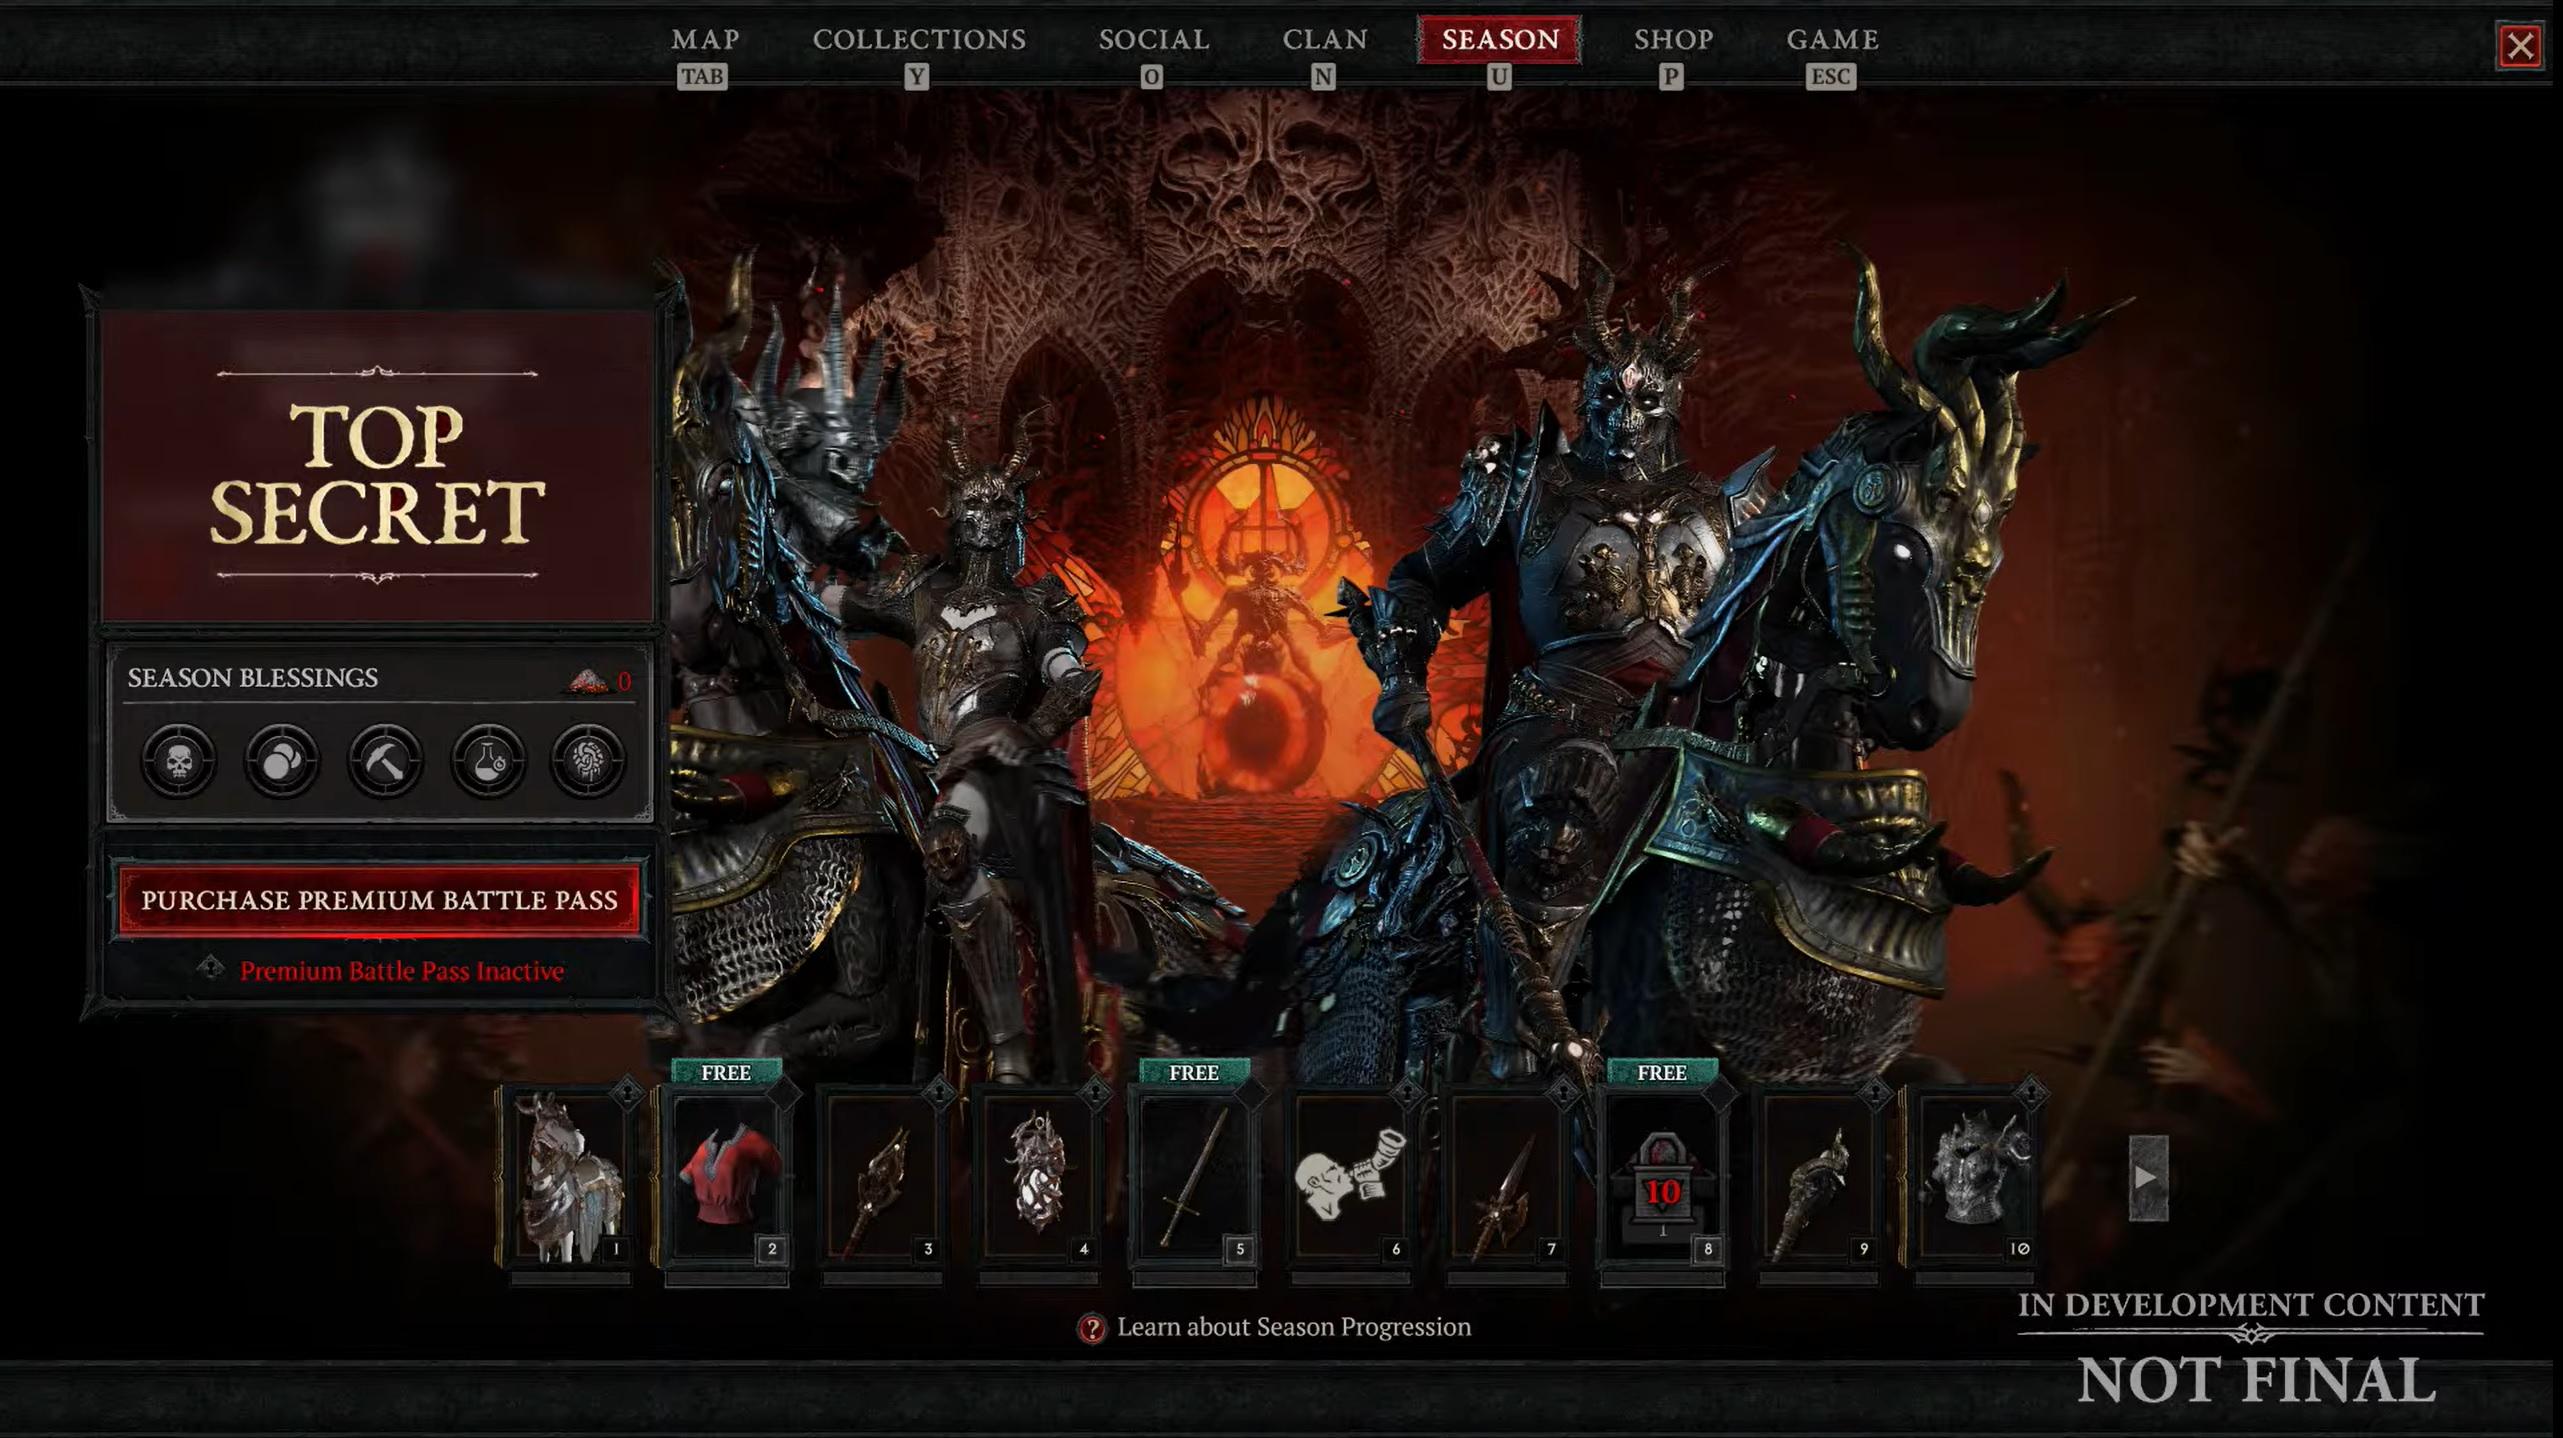 A look at the Diablo IV Battle Pass along with the button to purchase the Premium track.